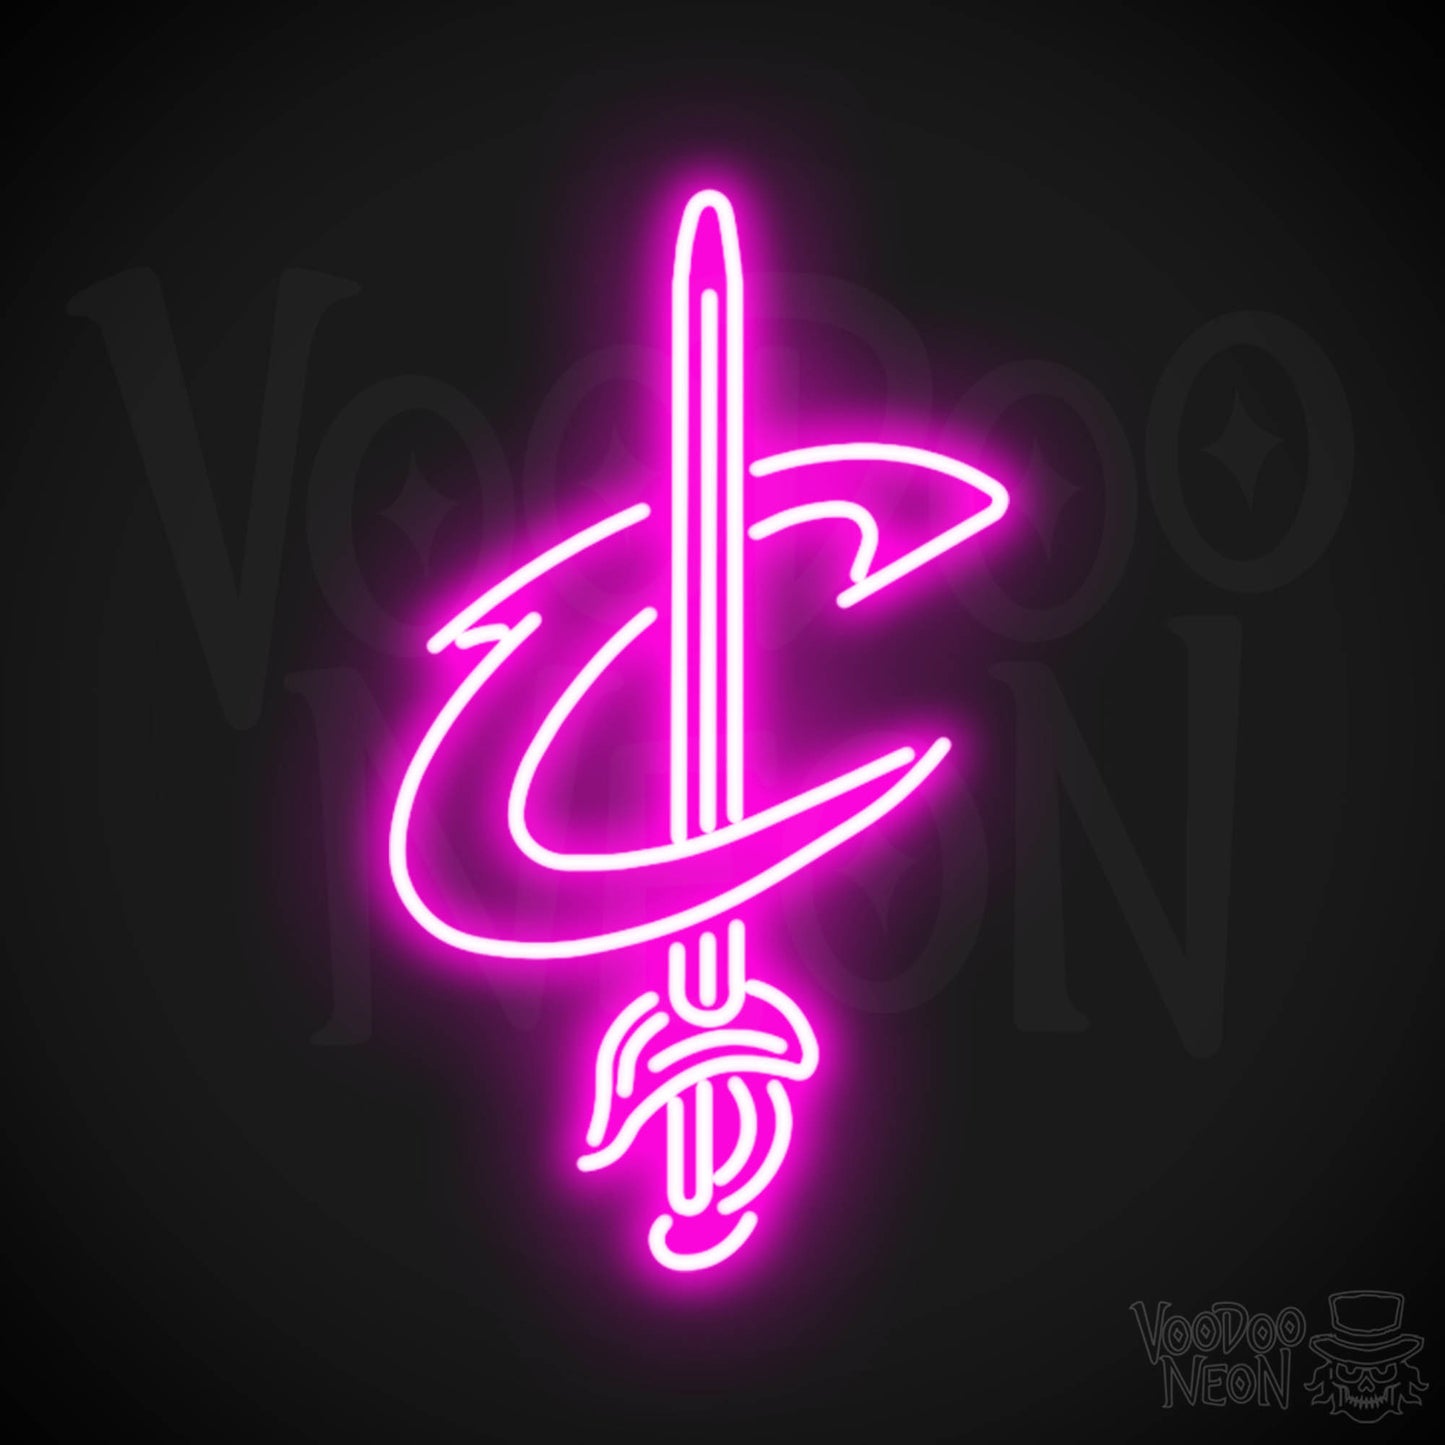 Cleveland Cavaliers Neon Sign - Cleveland Cavaliers Sign - Neon Cavaliers Wall Art - Color Pink